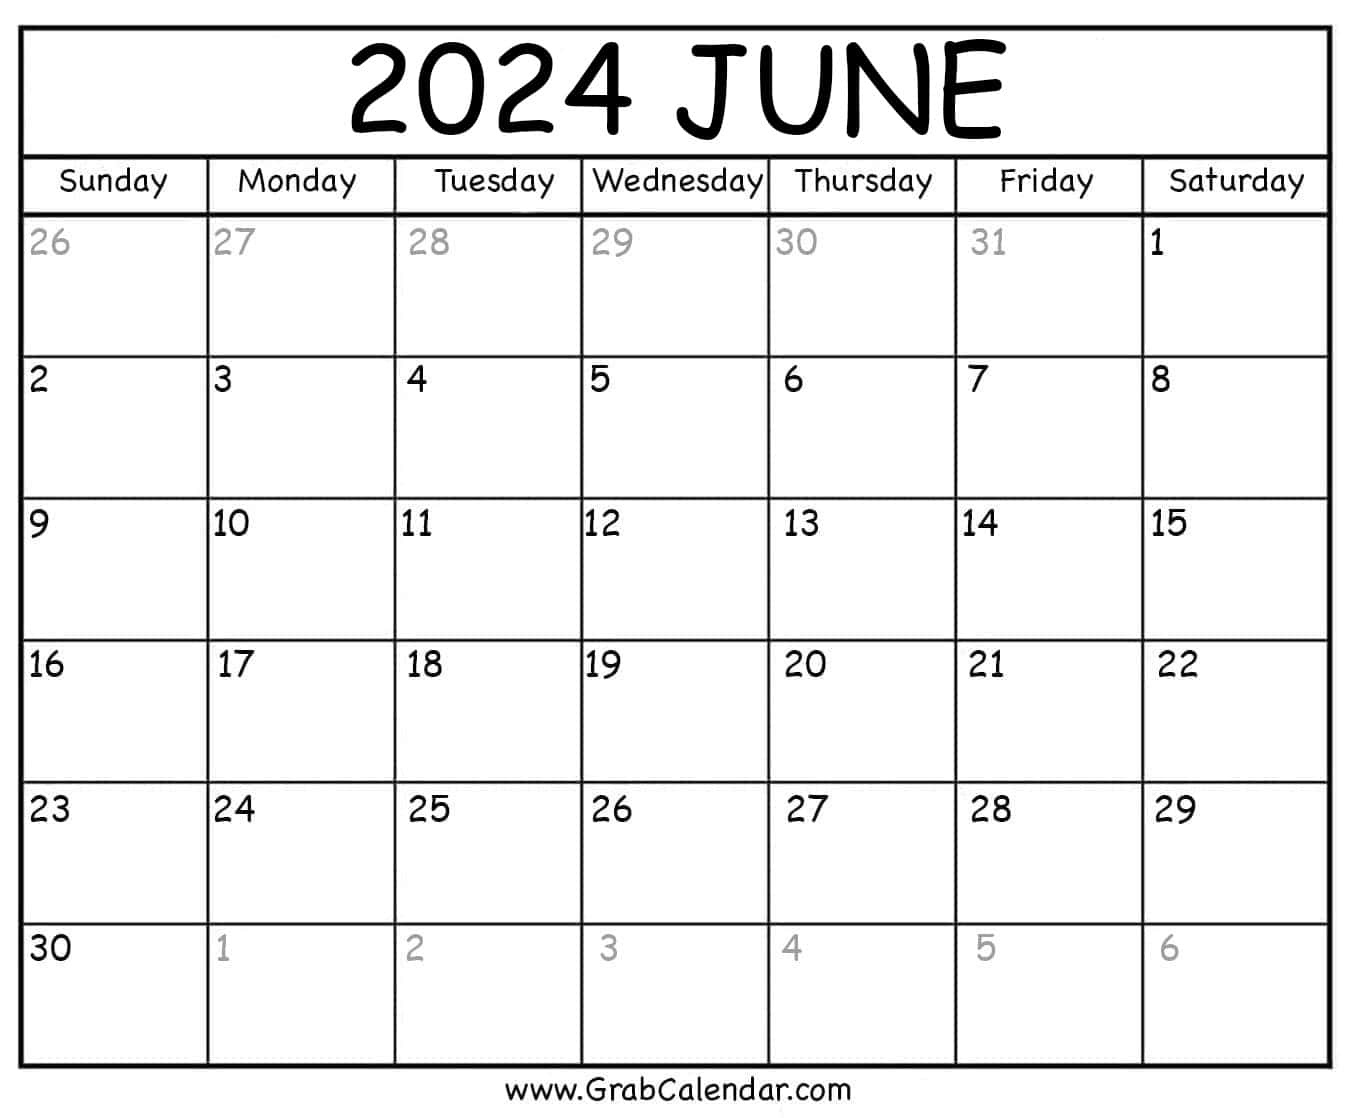 Printable June 2024 Calendar within Give Me The Calendar For June 2024